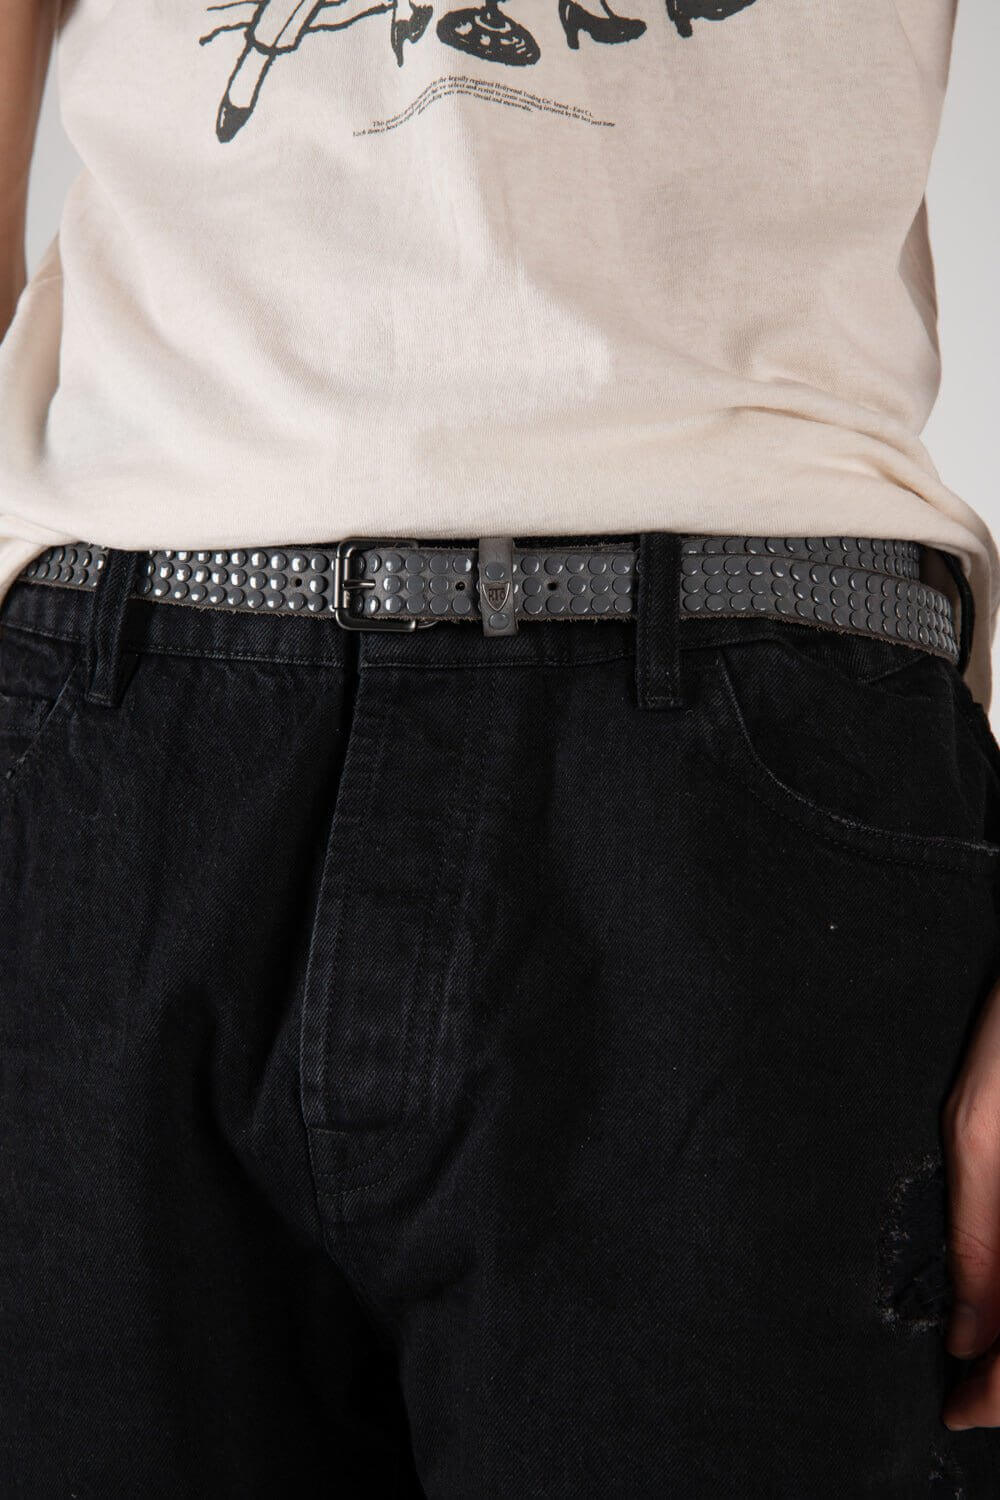 3.000 STUDS COLOR BLOCK BELT Leather belt with varnish studs, brass buckle, studded zamac belt loop with HTC logo rivet. Height: 2 cm. Made in Italy. HTC LOS ANGELES